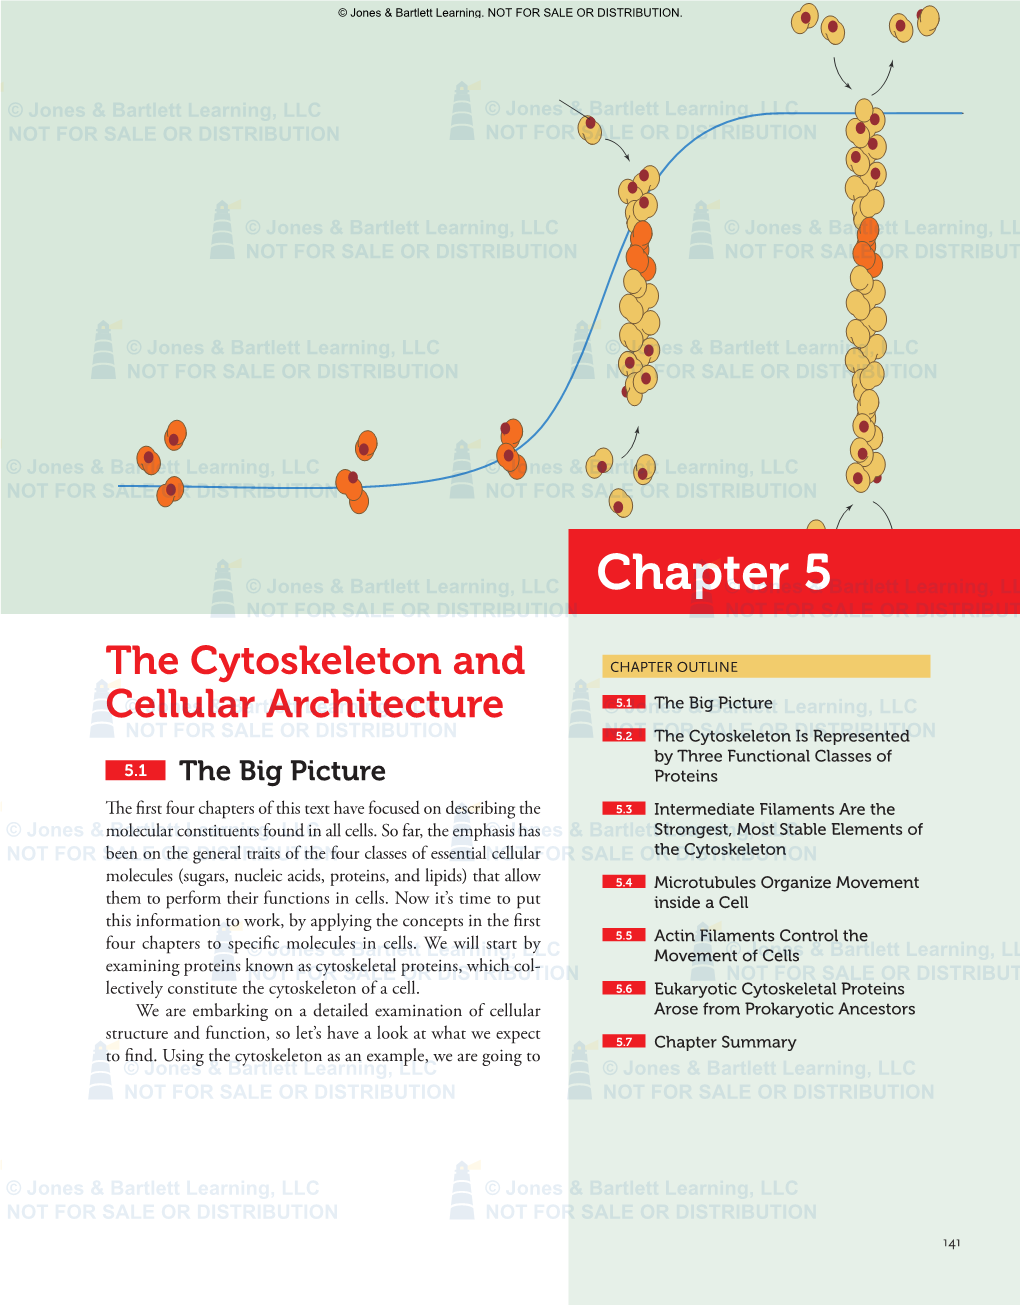 Chapter 5 the Cytoskeleton and Cellular Architecture